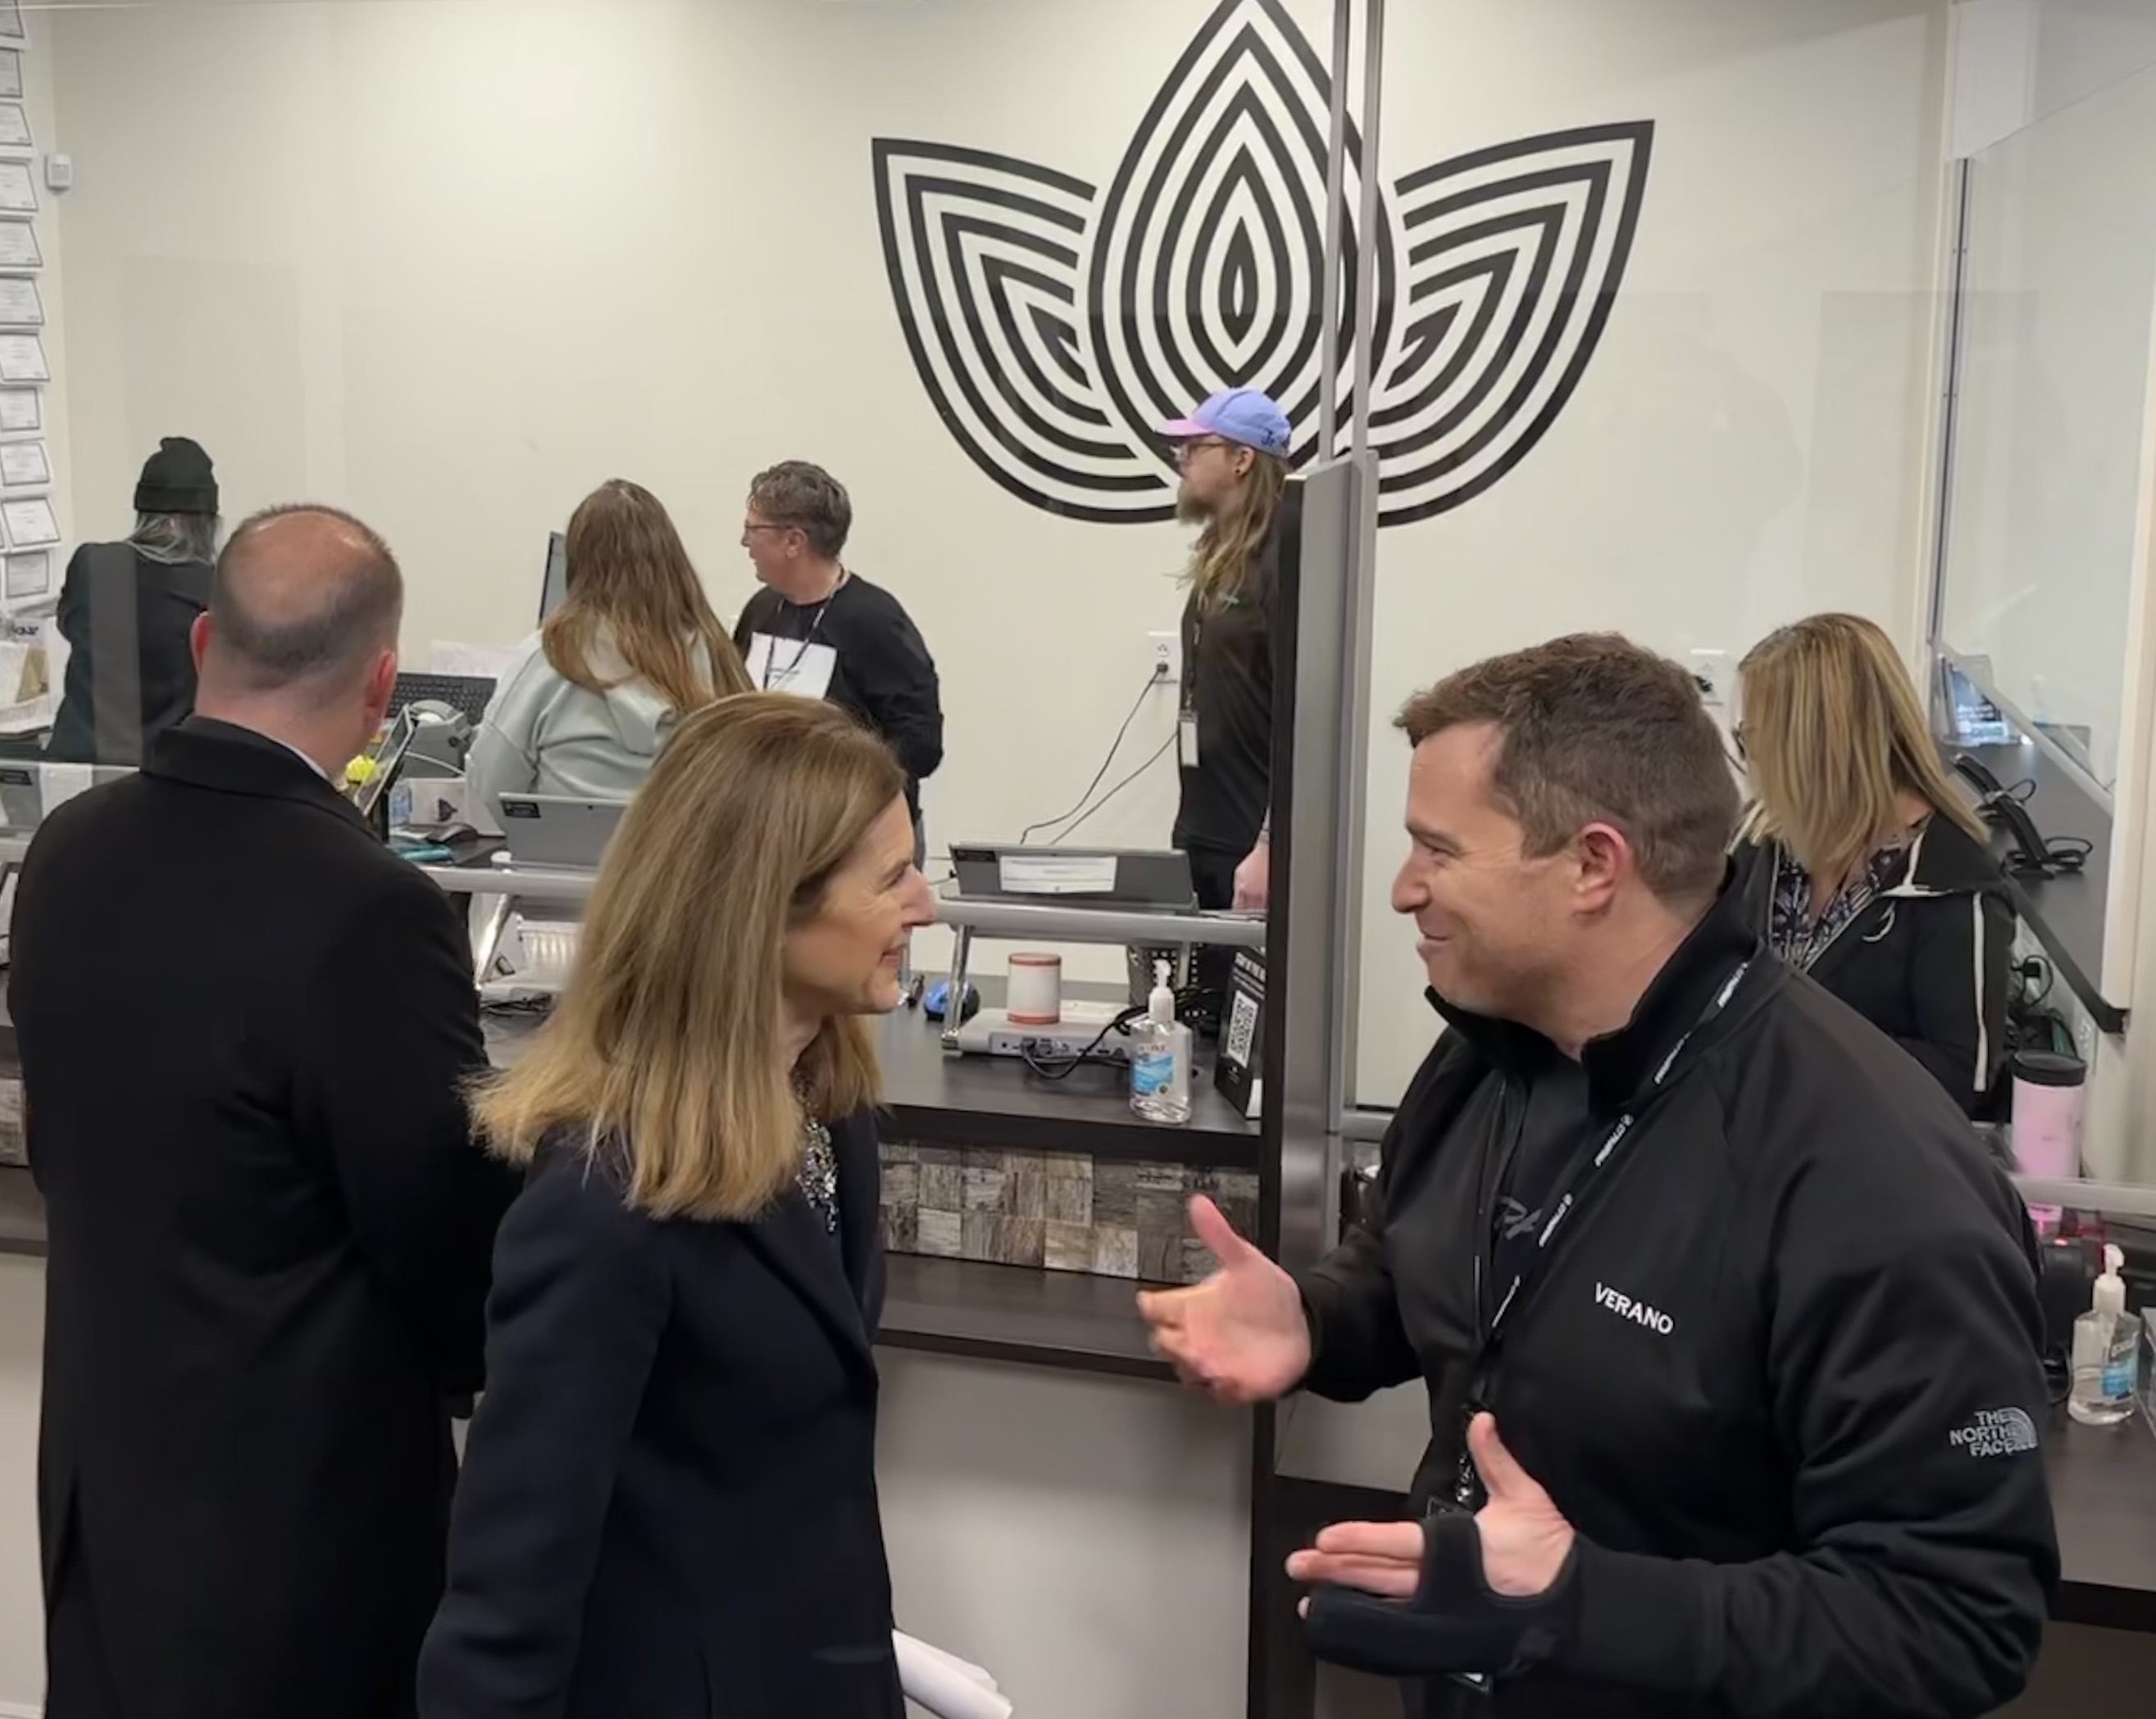 Verano Welcomes Connecticut Lieutenant Governor Susan Bysiewicz and Cannabis Customers at Zen Leaf Meriden to Commemorate the Launch of Adult Use Sales